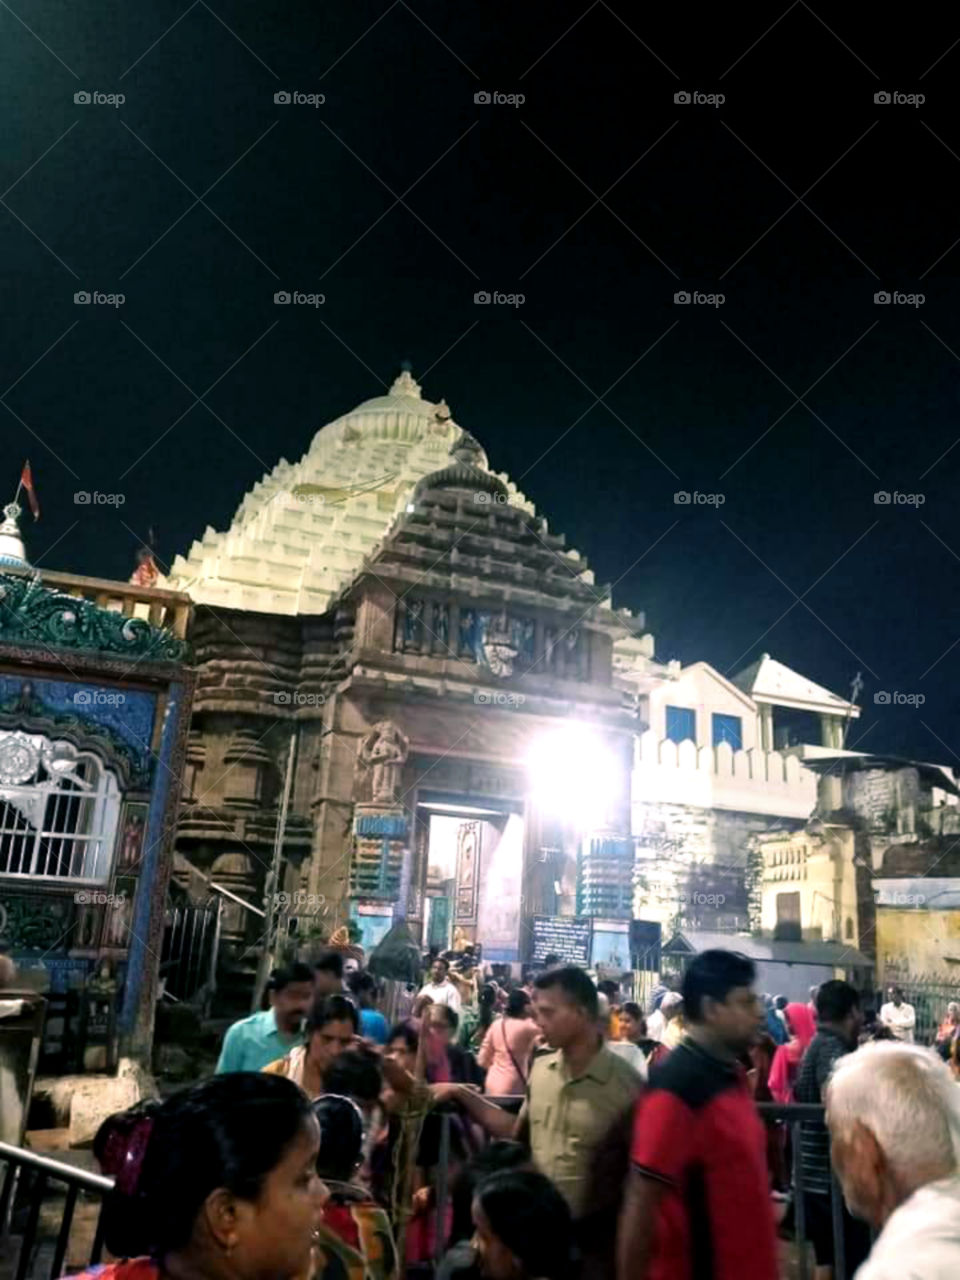 The Shree Jagannath Temple of Puri is an important Hindu temple dedicated to Lord Jagannath, a form of lord Maha Vishnu, located on the eastern coast of India, at Puri in the state of Odisha.The temple is an important pilgrimage destination.